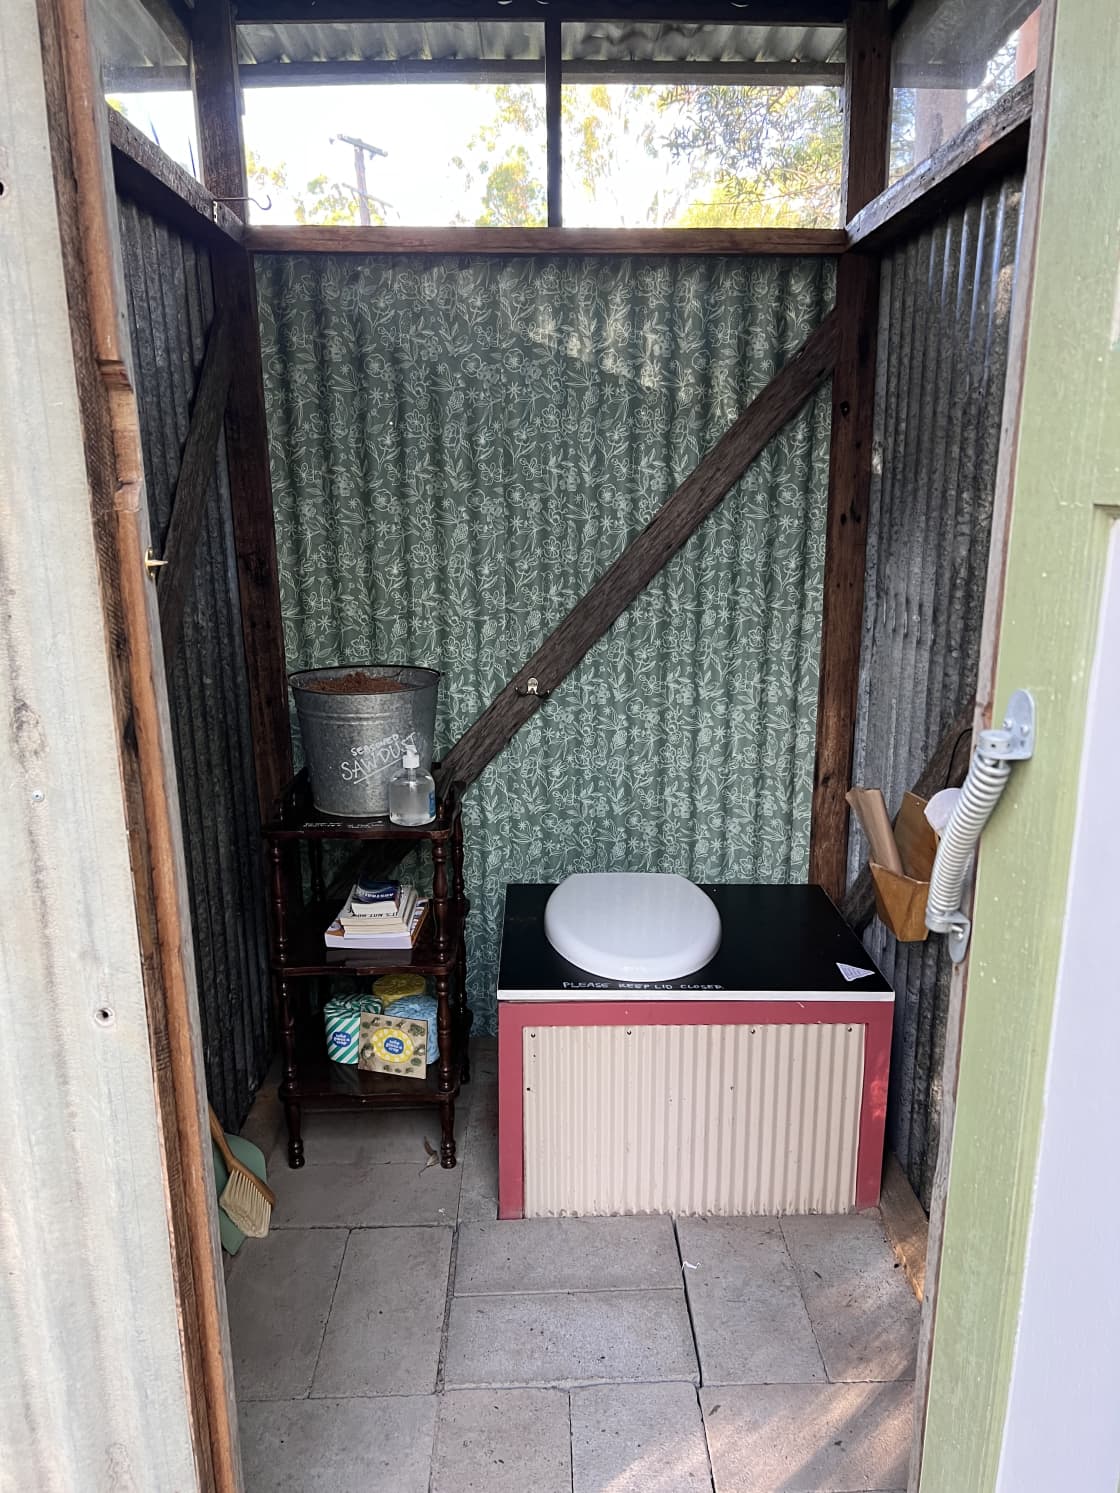 Our Lovely Bush Loo. Take time to admire the woodwork...